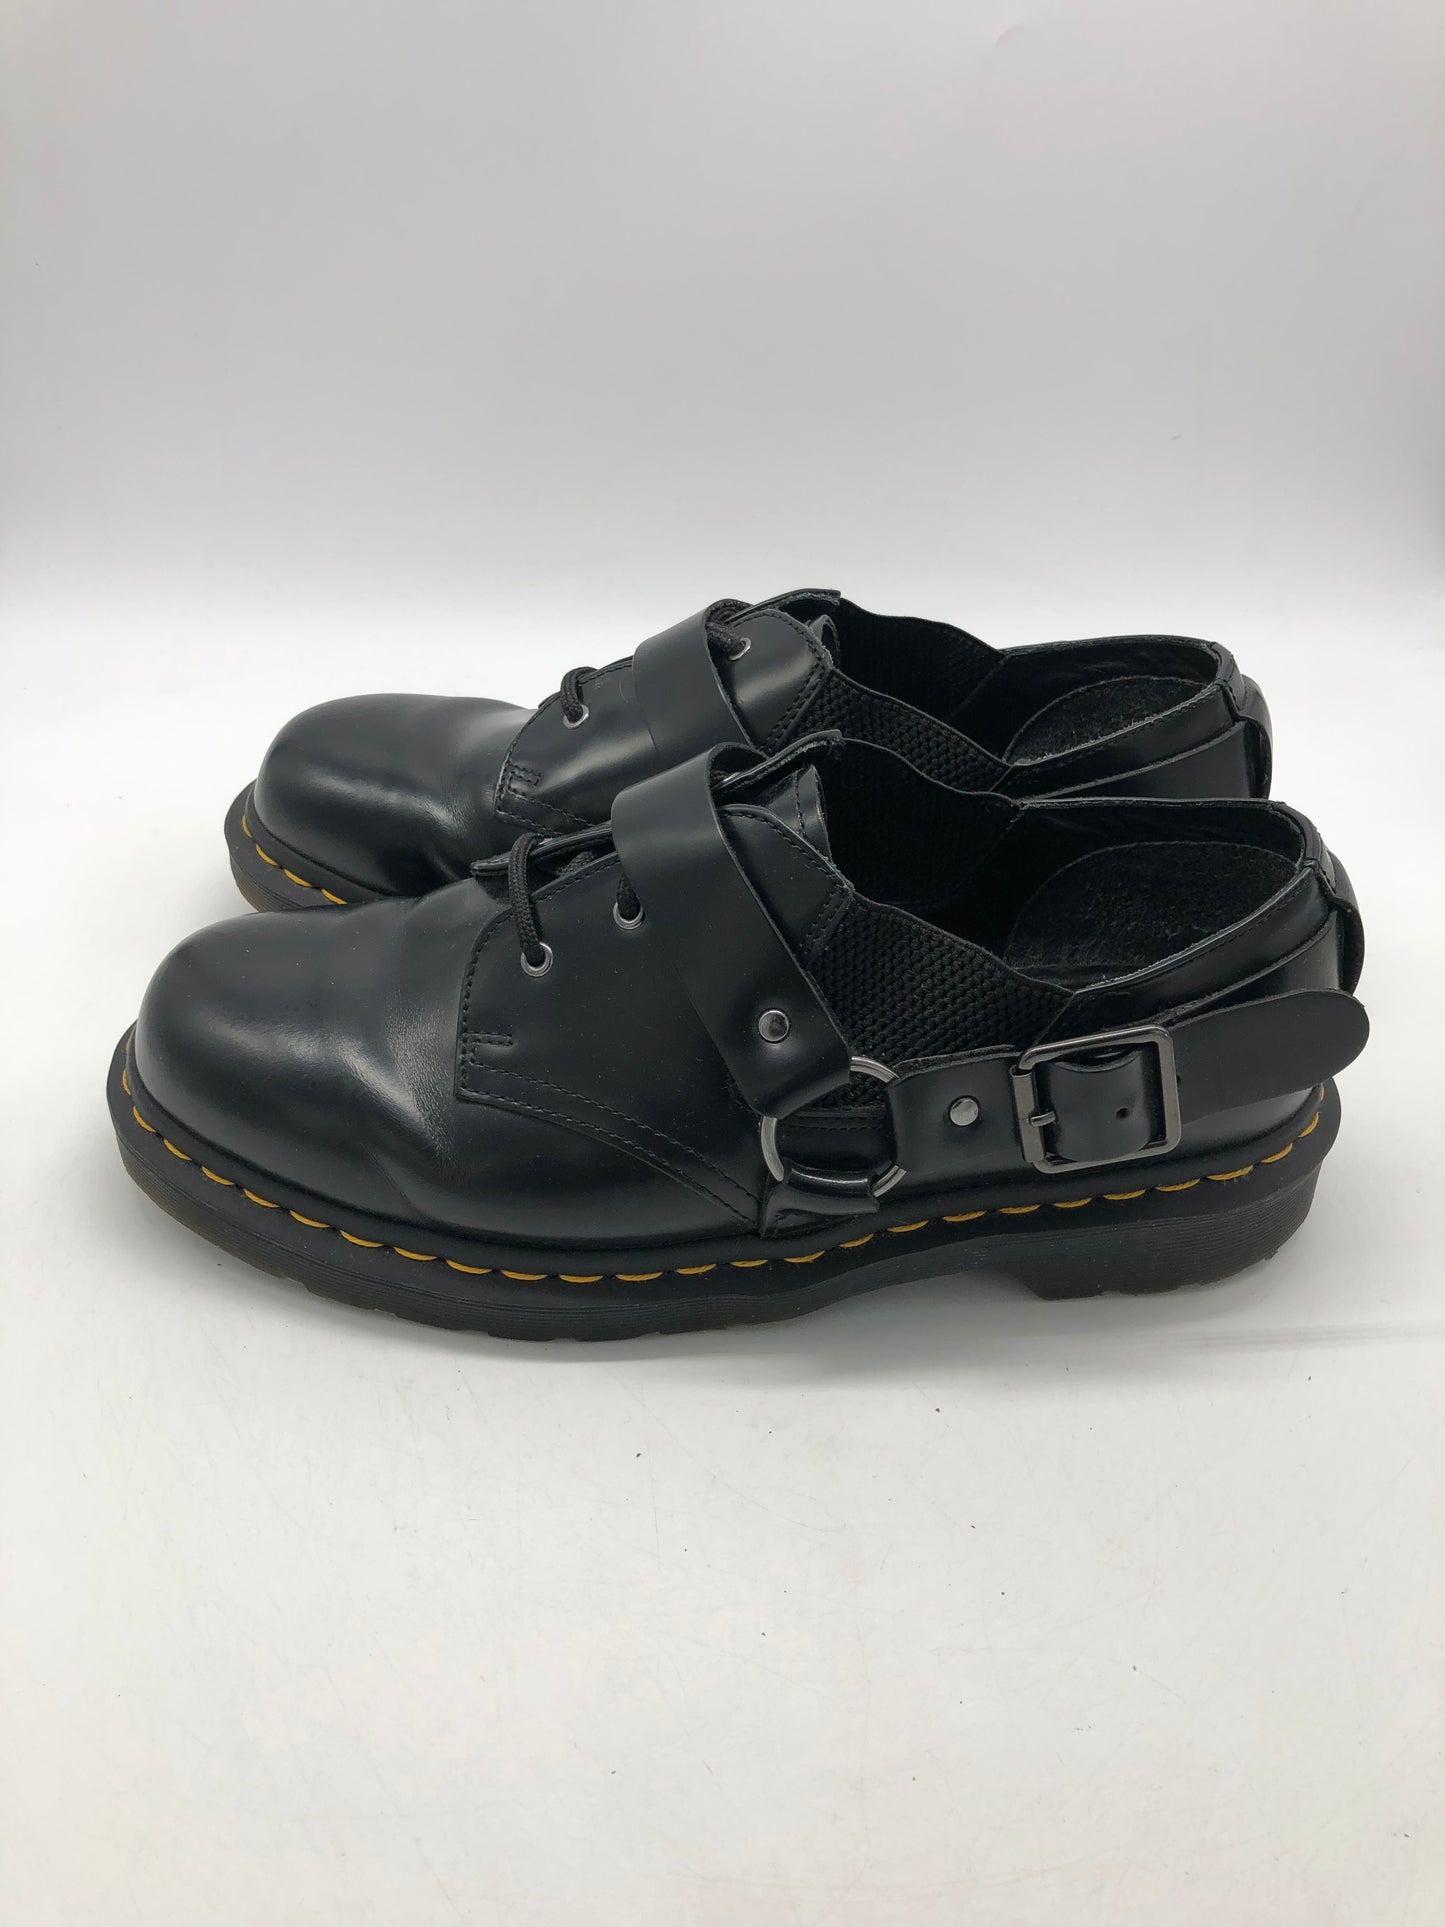 Preowned Dr. Martens Buckle Derby Boots Sz 10M/11.5W